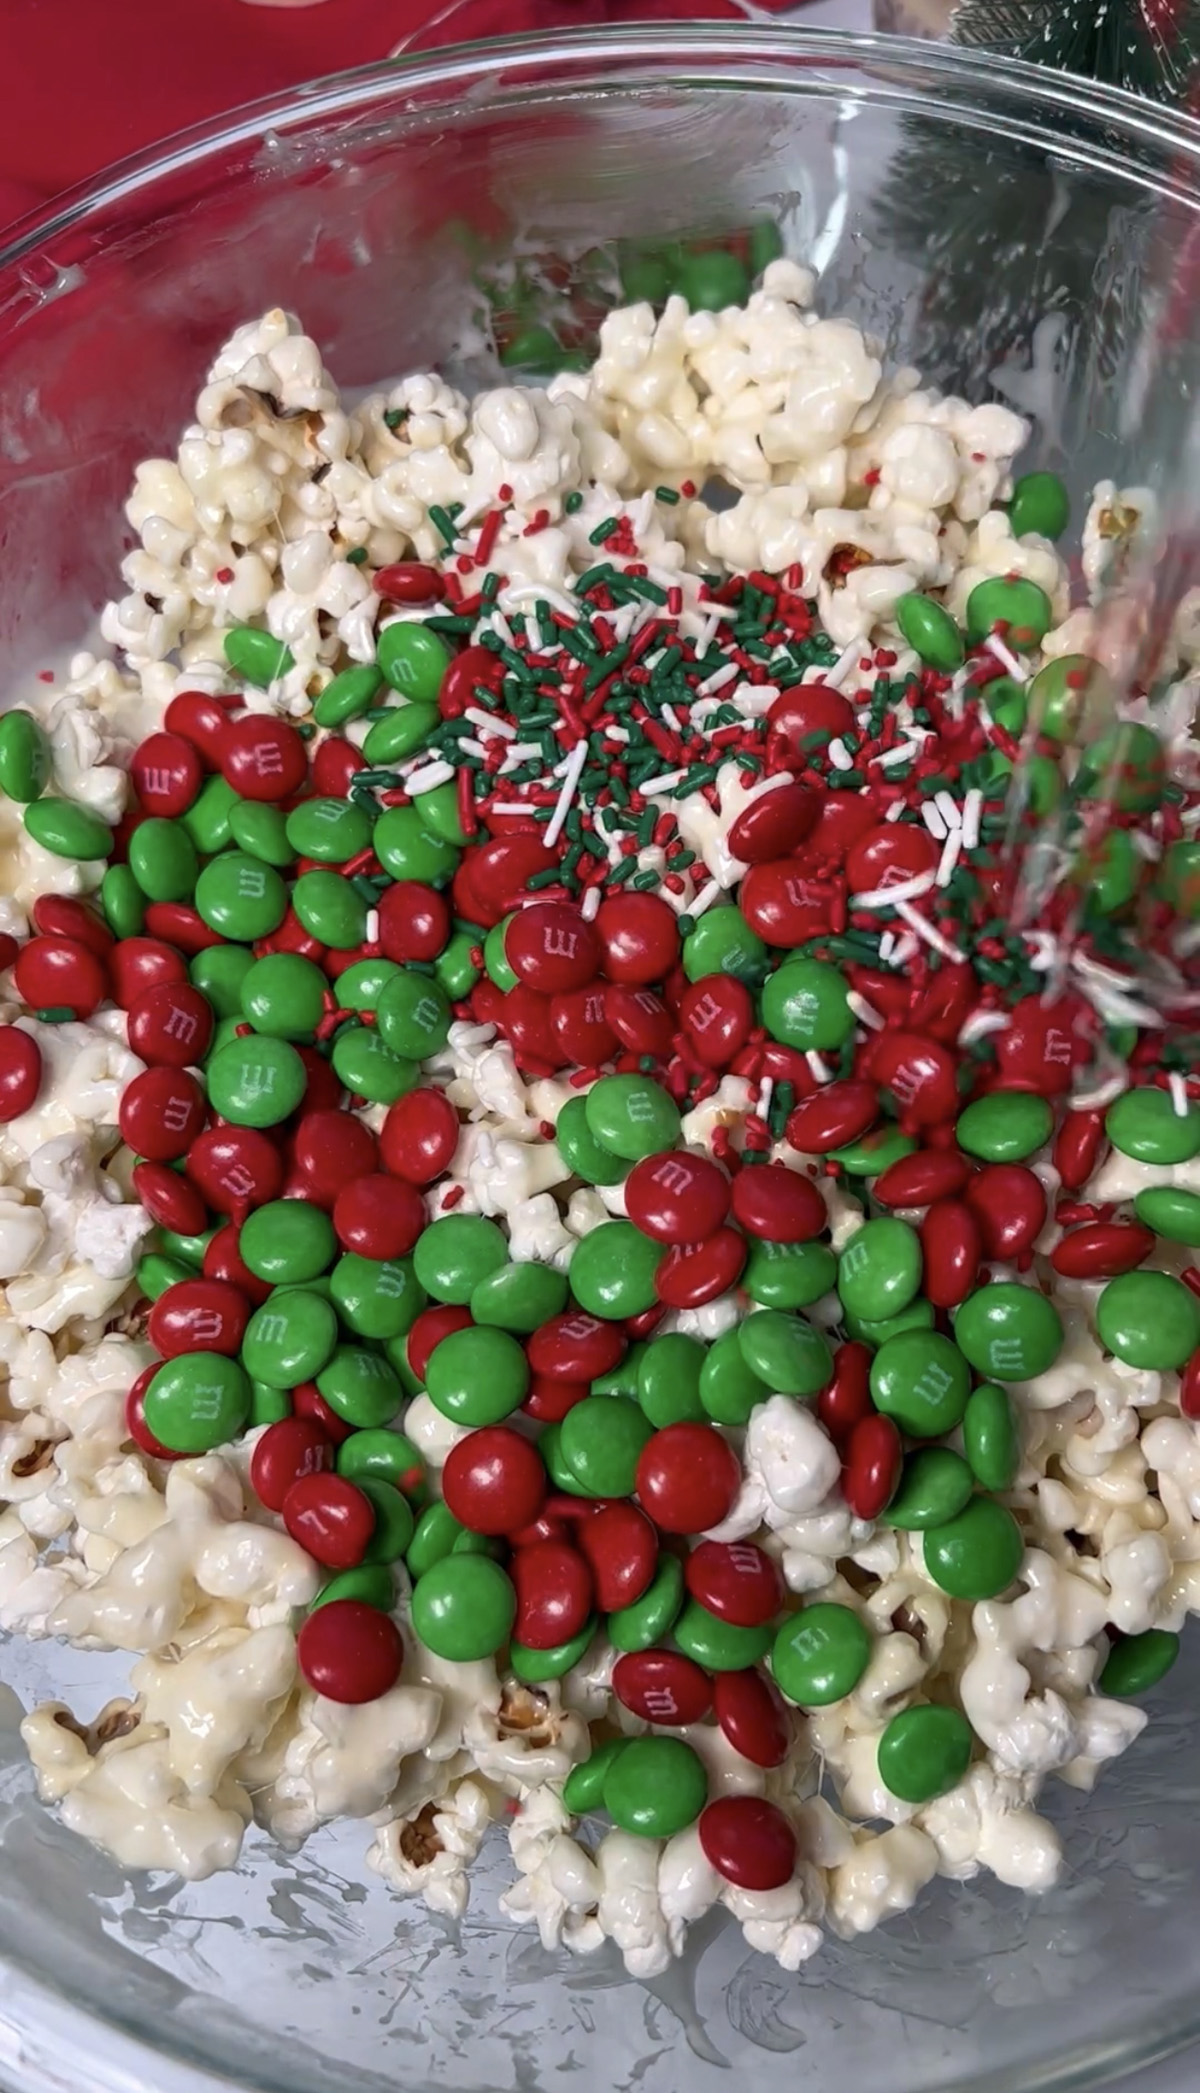 Mixing Christmas sprinkles into popcorn ball mixture.